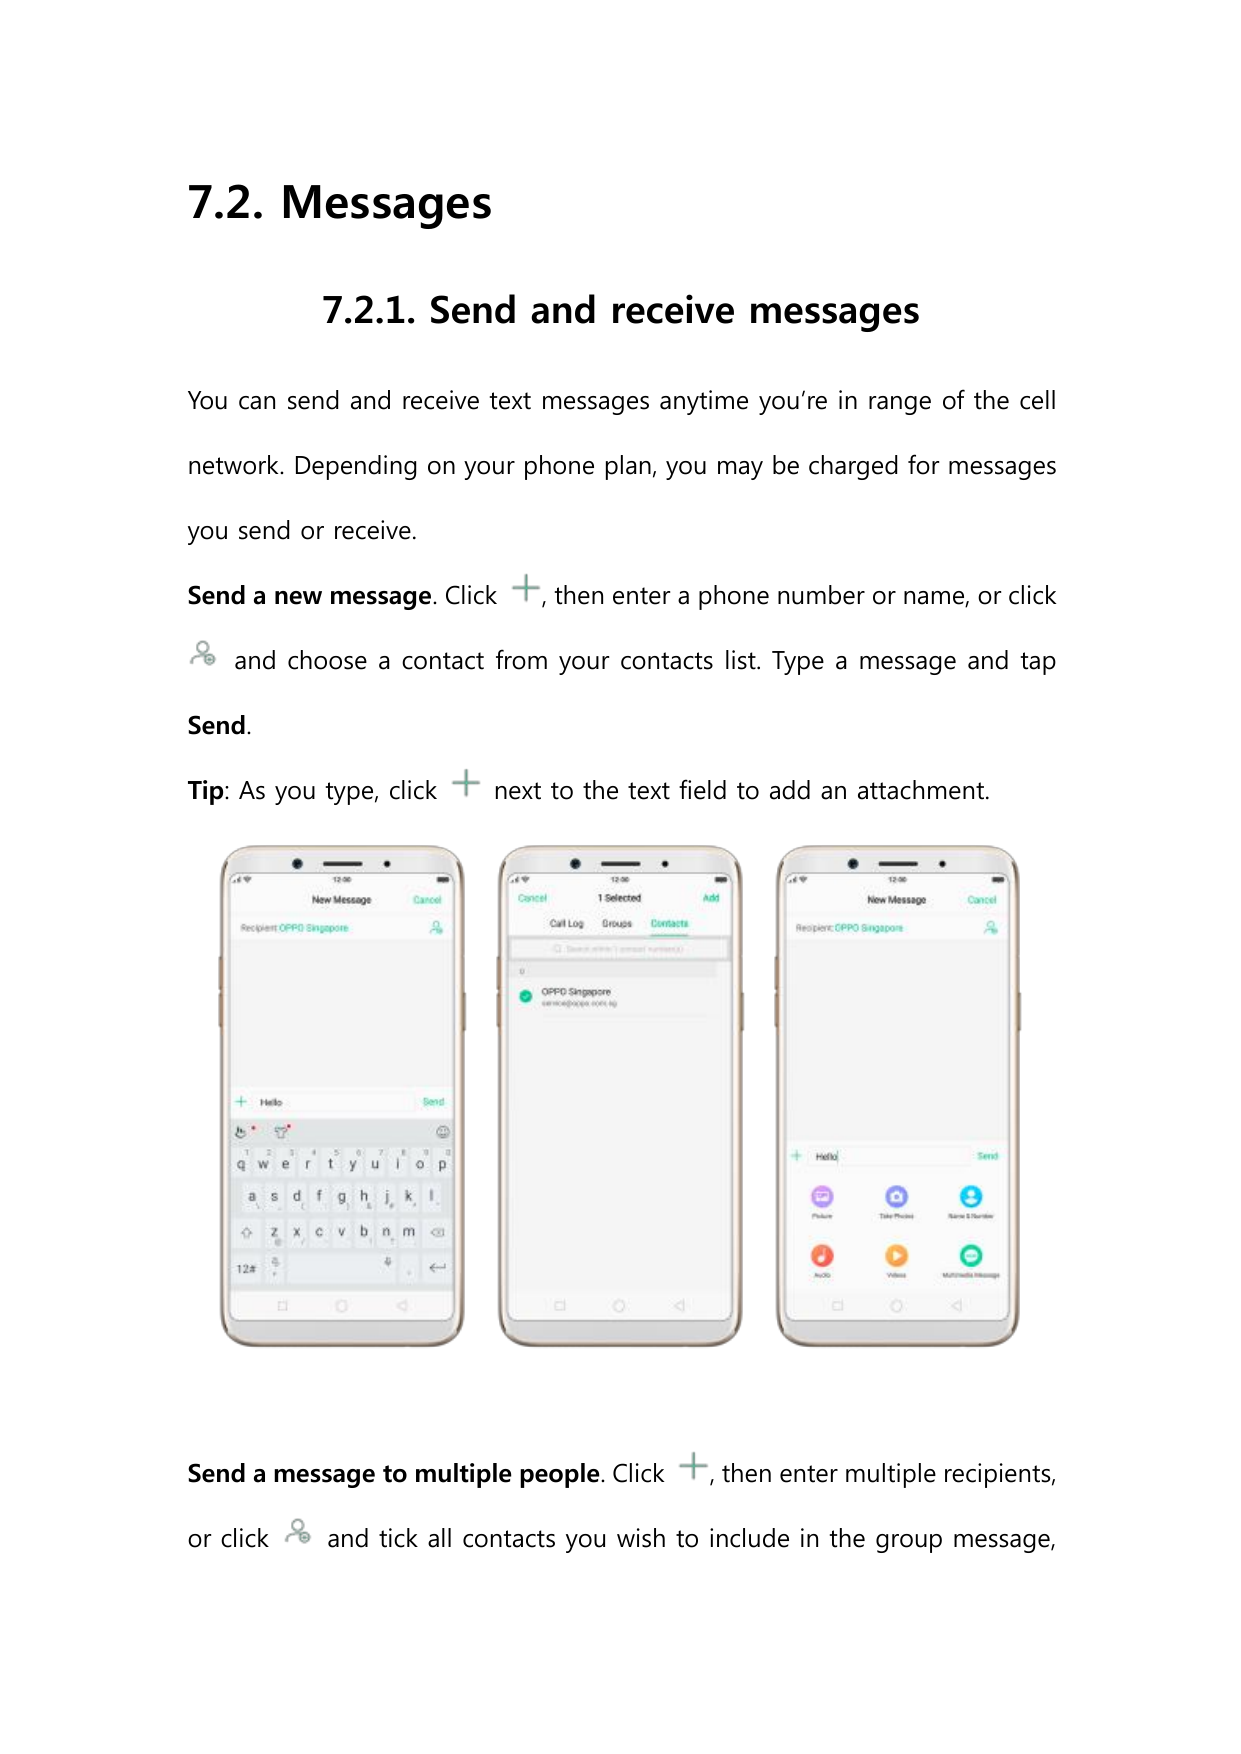 7.2. Messages7.2.1. Send and receive messagesYou can send and receive text messages anytime you’re in range of the cellnetwork. 